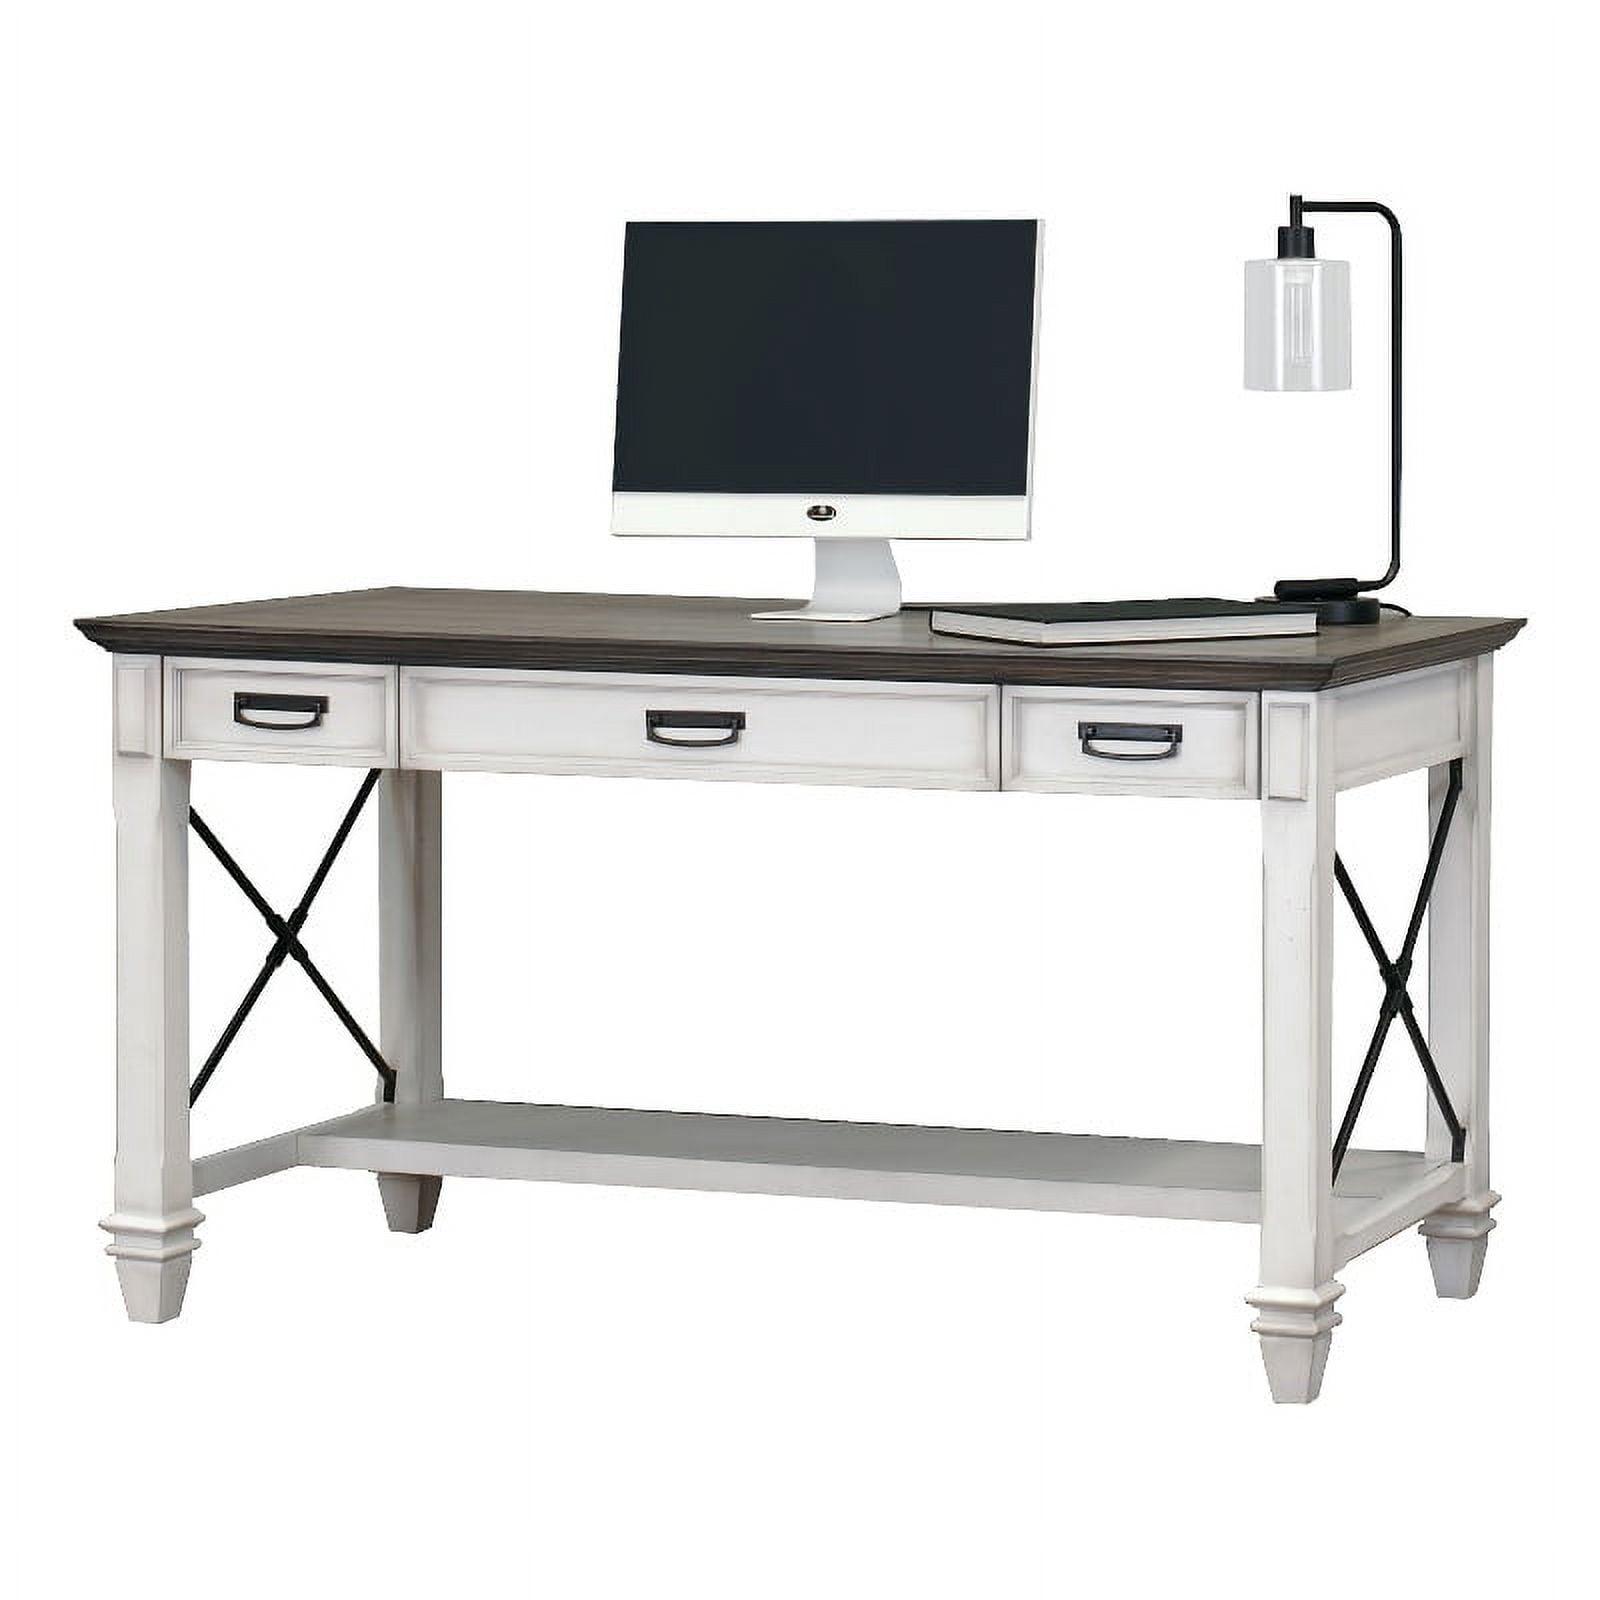 Hartford Traditional White Wood Adjustable Home Office Desk with Drawers & Power Outlets